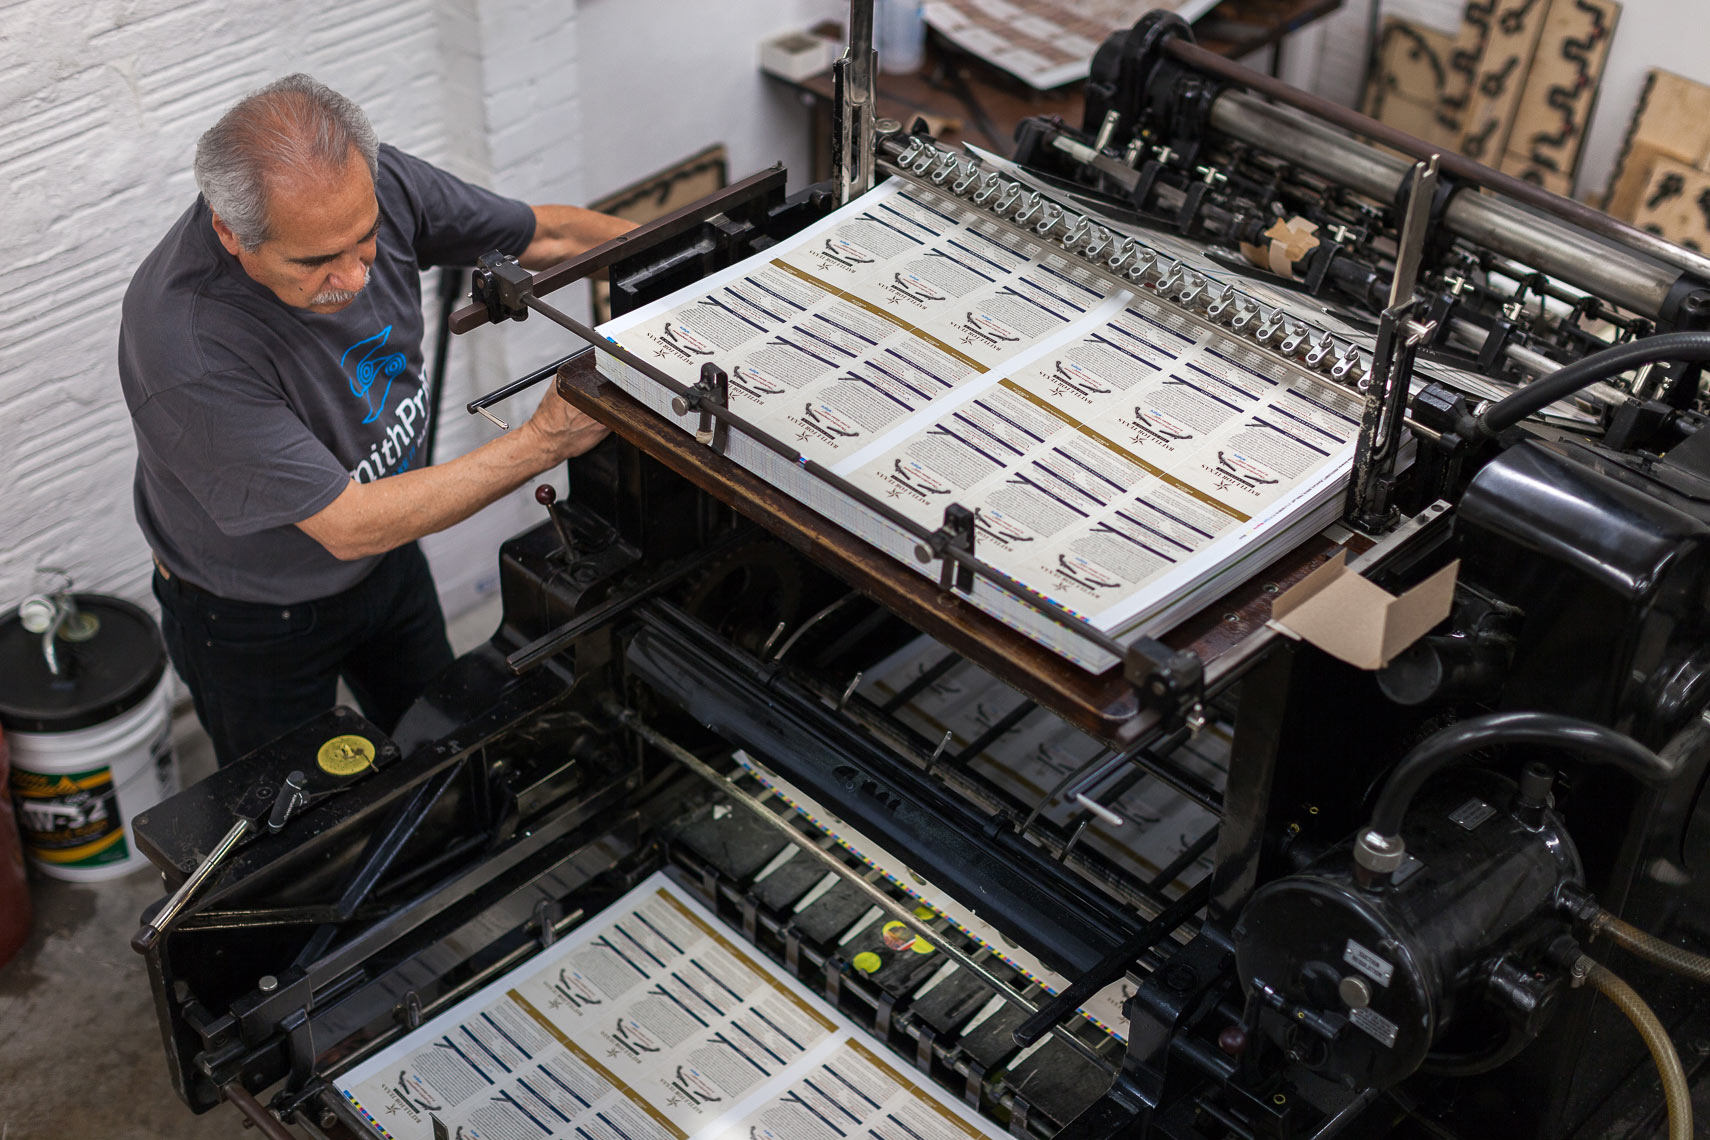 Industrial Printer Photographed by Jason Risner